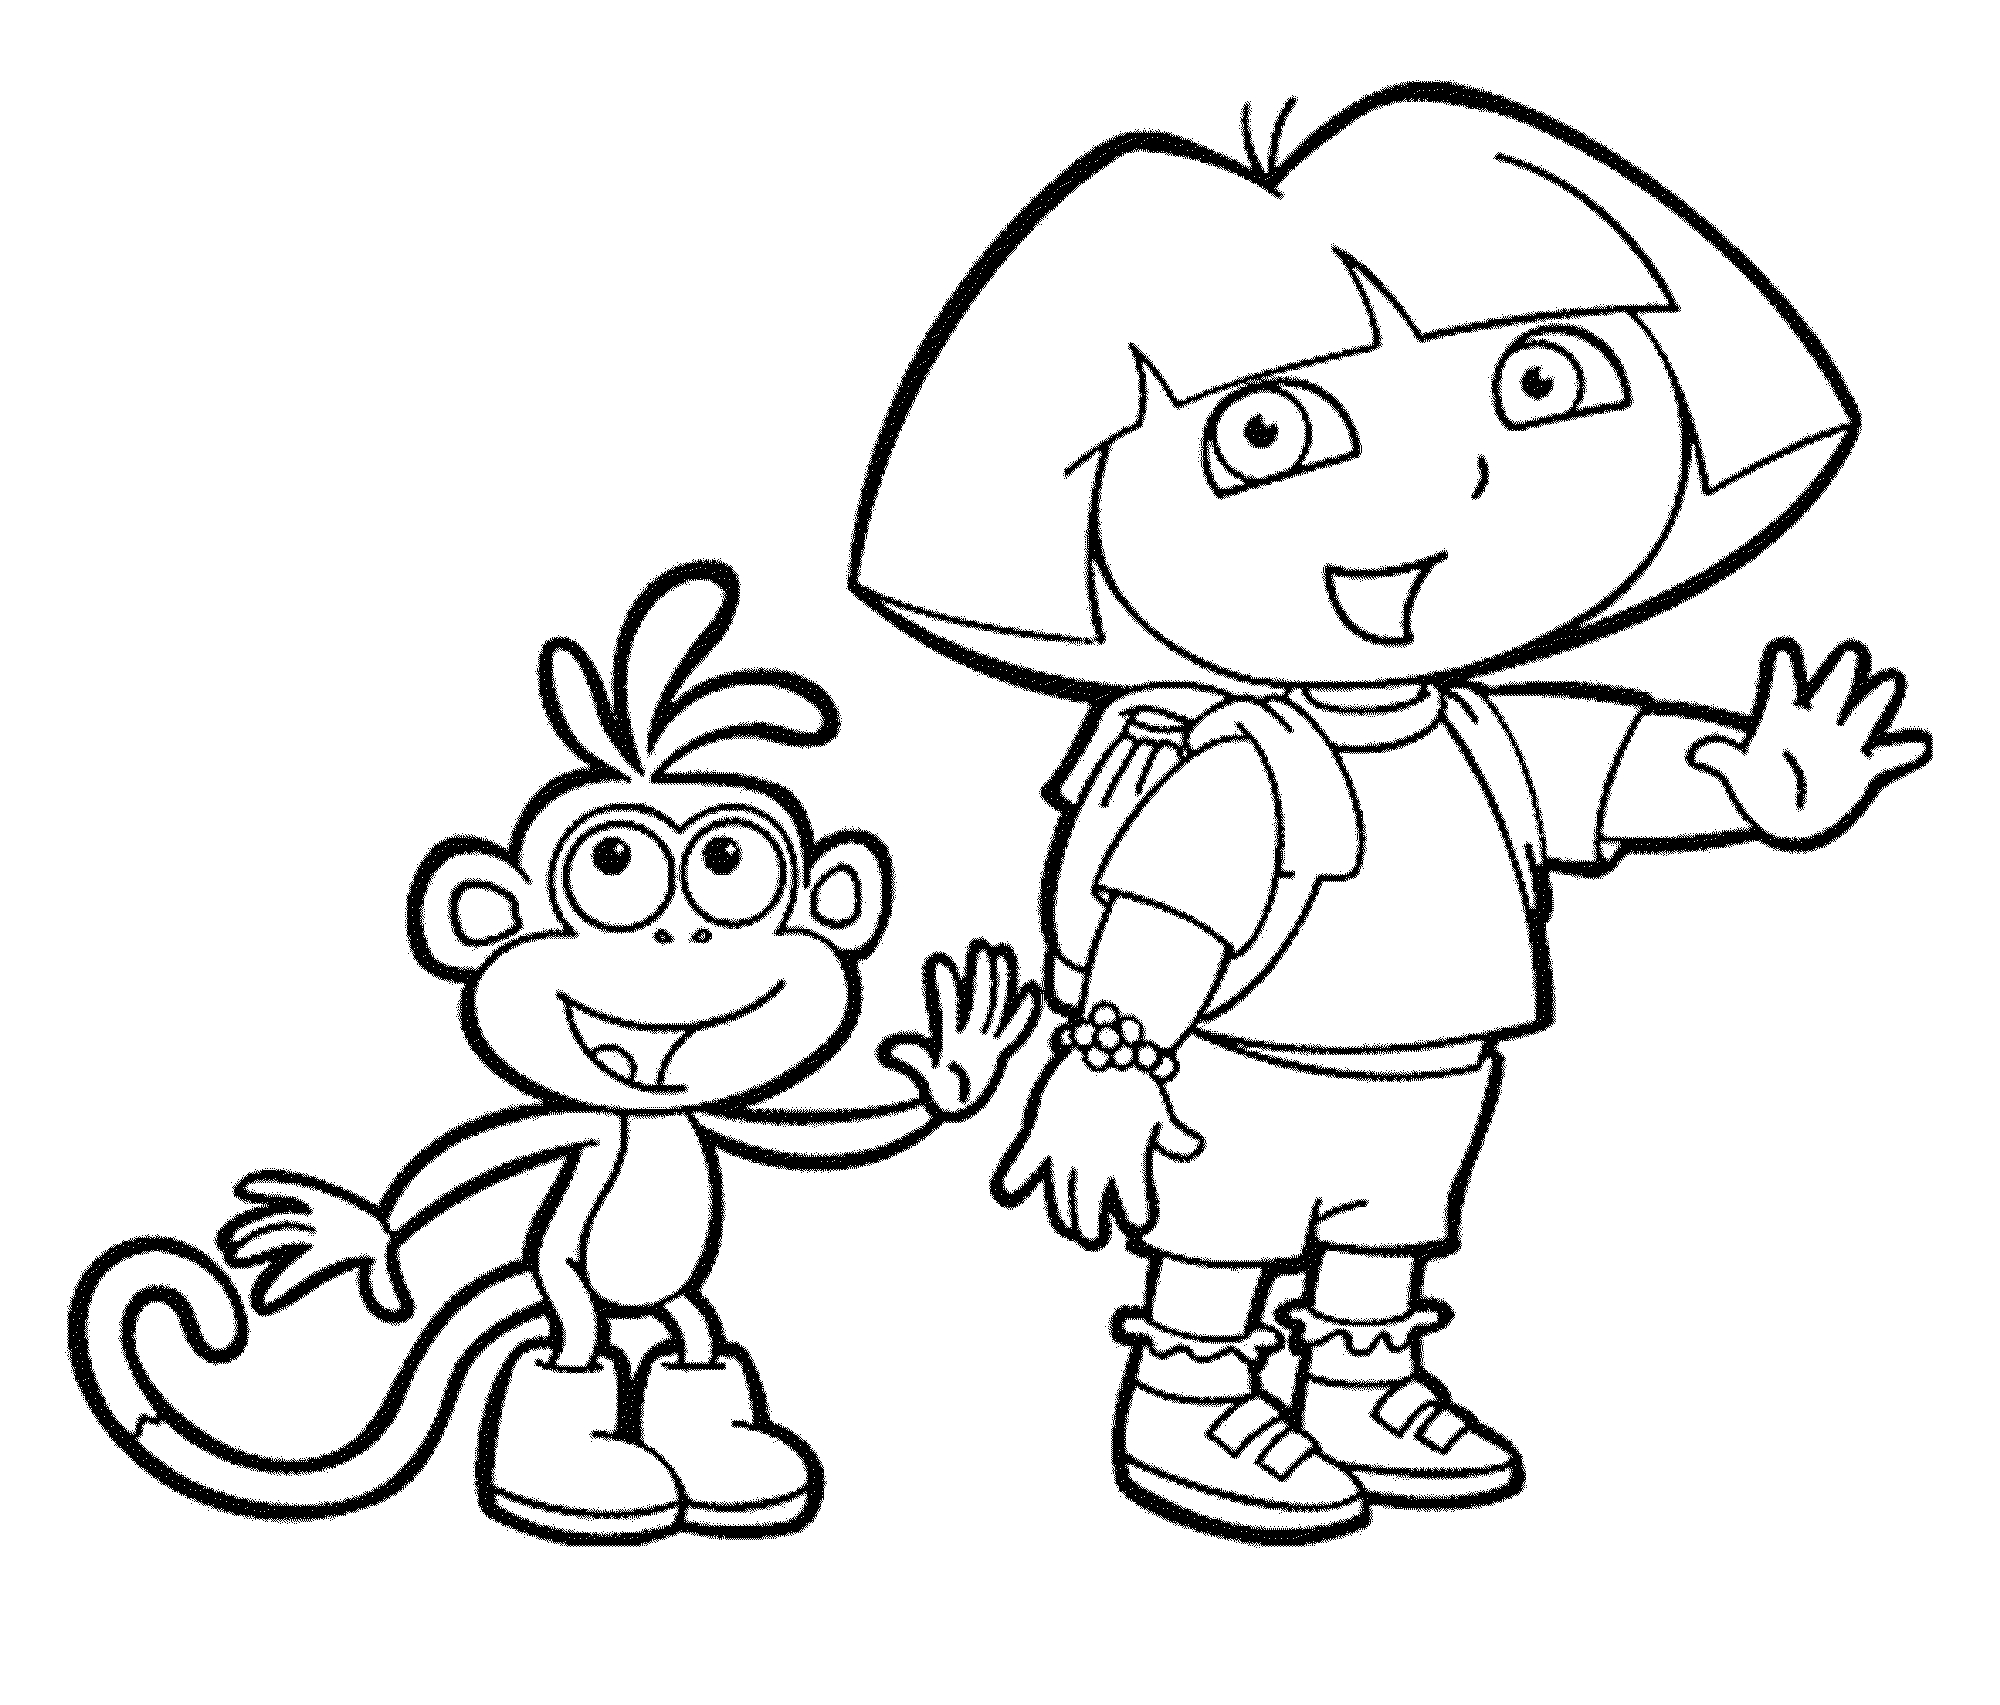 Dora The Explorer Coloring Pages To Print at Free